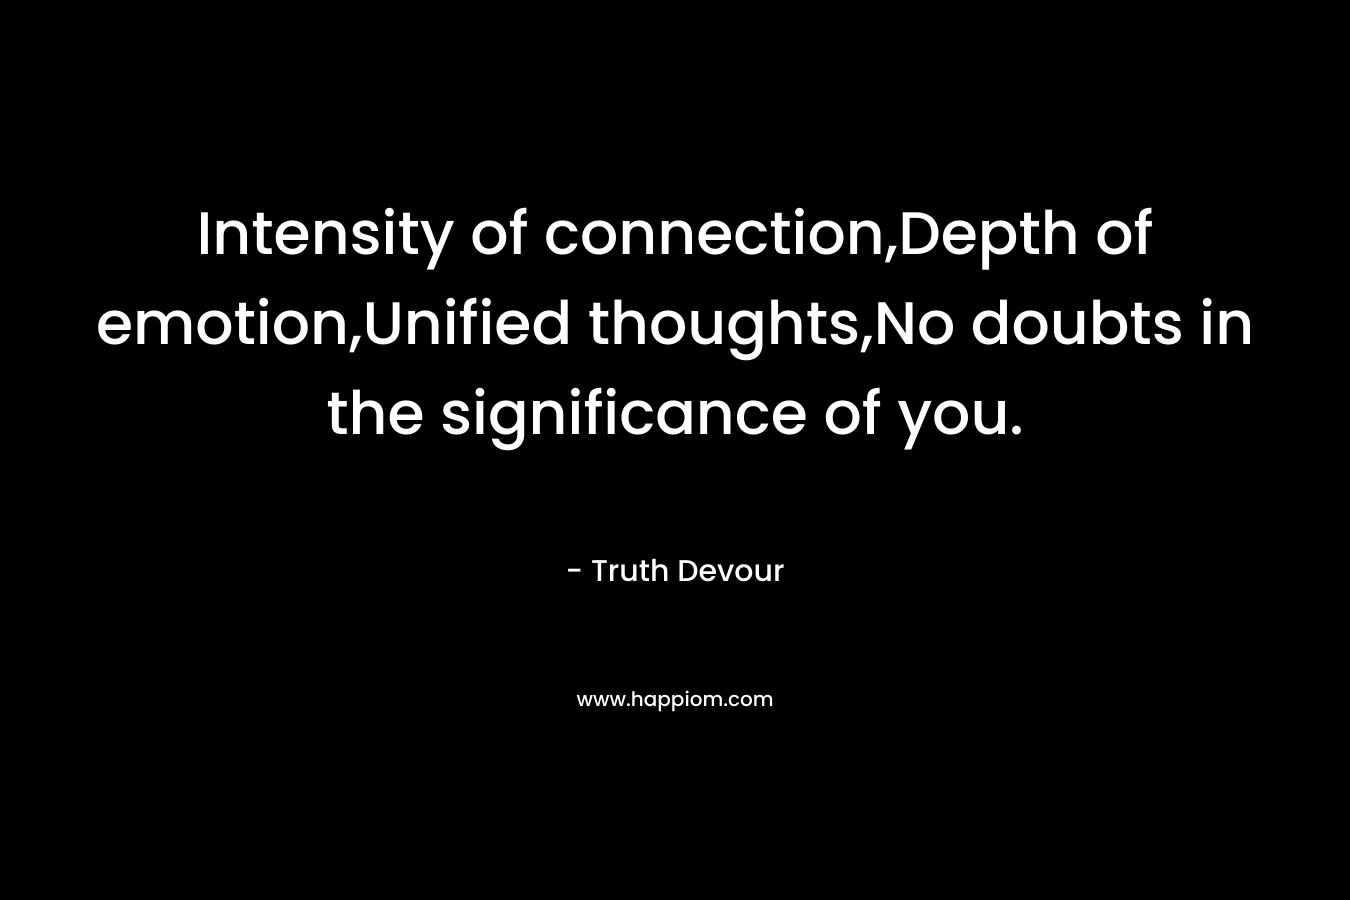 Intensity of connection,Depth of emotion,Unified thoughts,No doubts in the significance of you. – Truth Devour